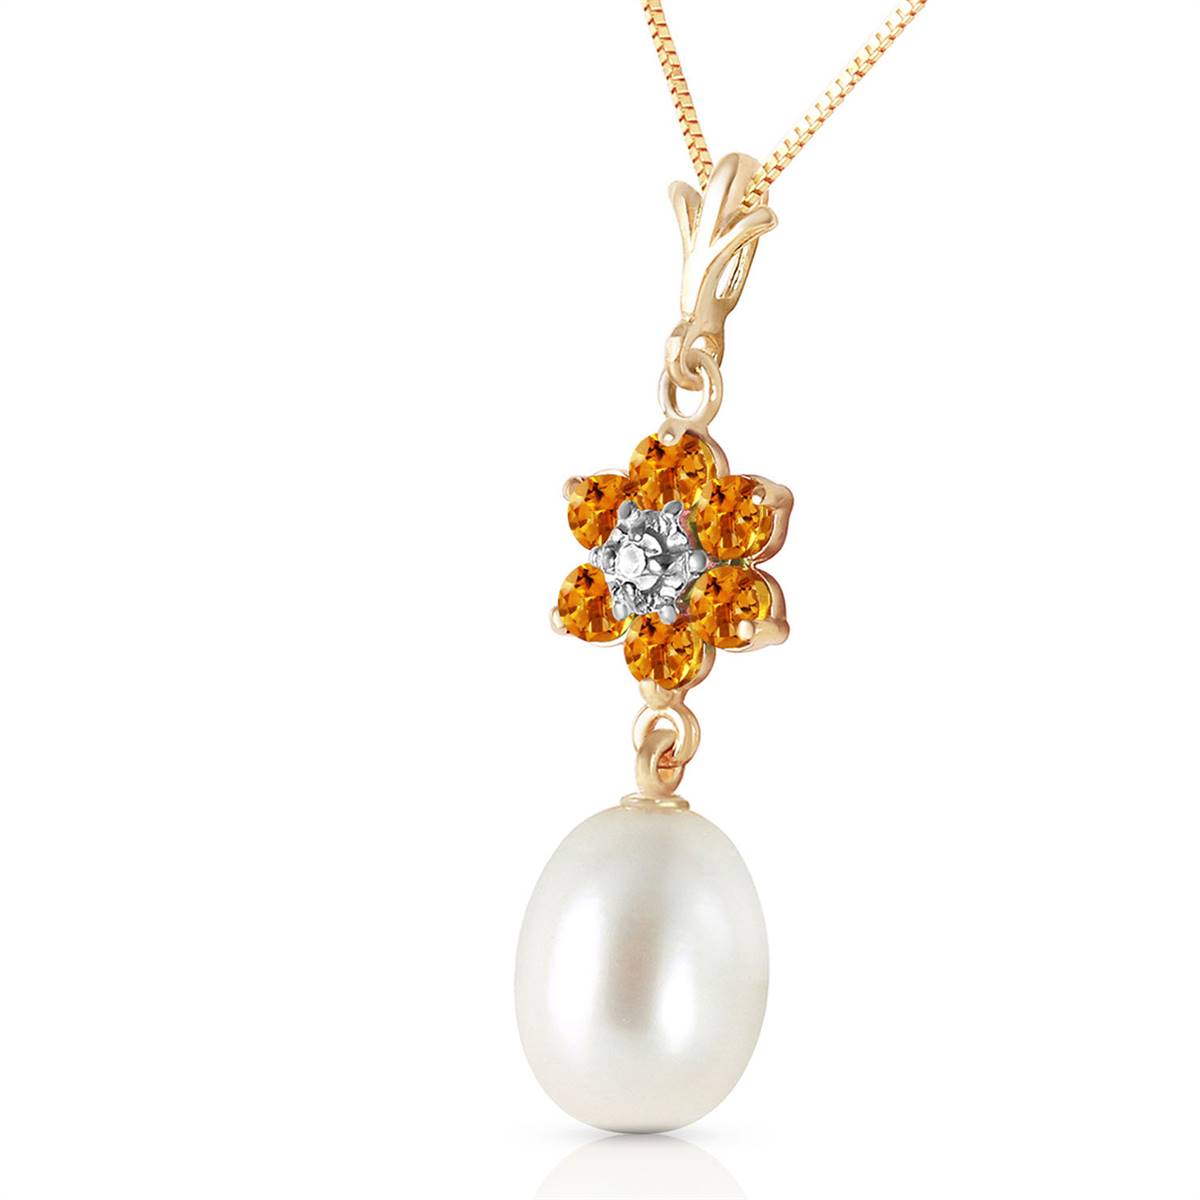 4.53 Carat 14K Solid Yellow Gold Necklace Natural Pearl, Citrine Diamond